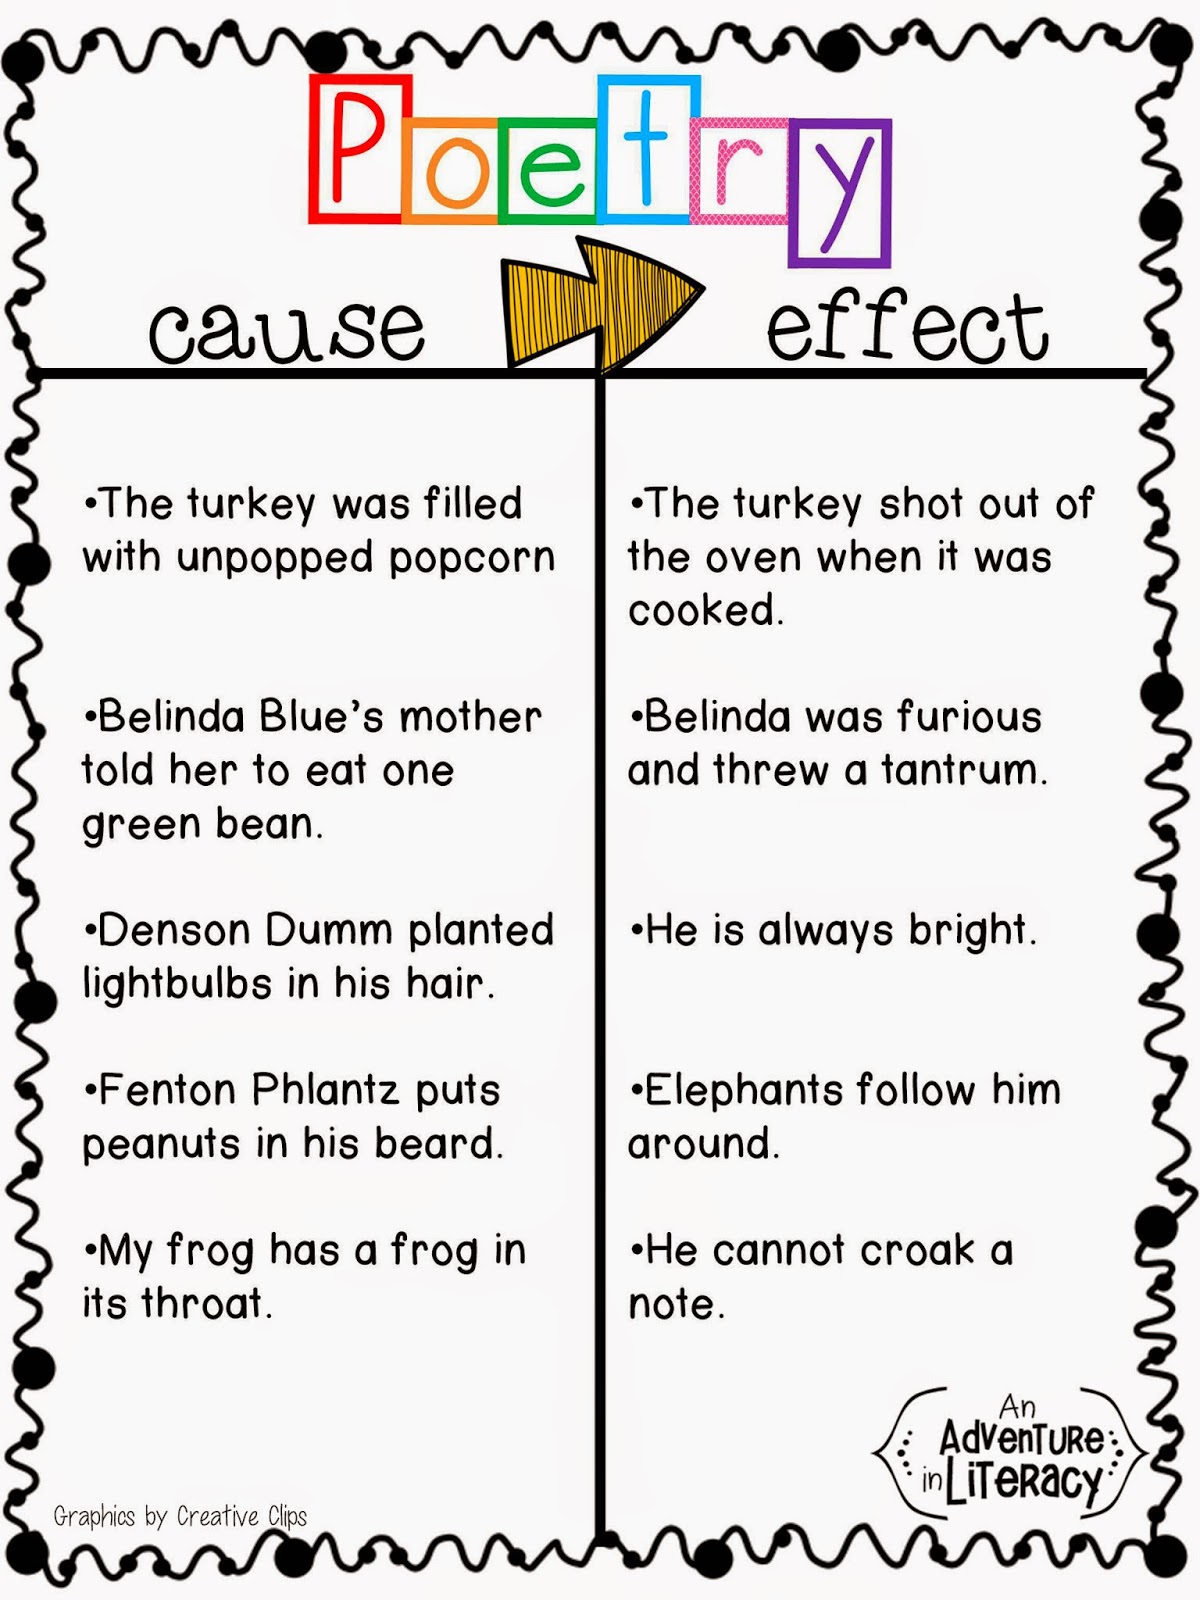 worksheet-cause-and-effect-worksheets-for-4th-grade-worksheet-fun-worksheet-study-site